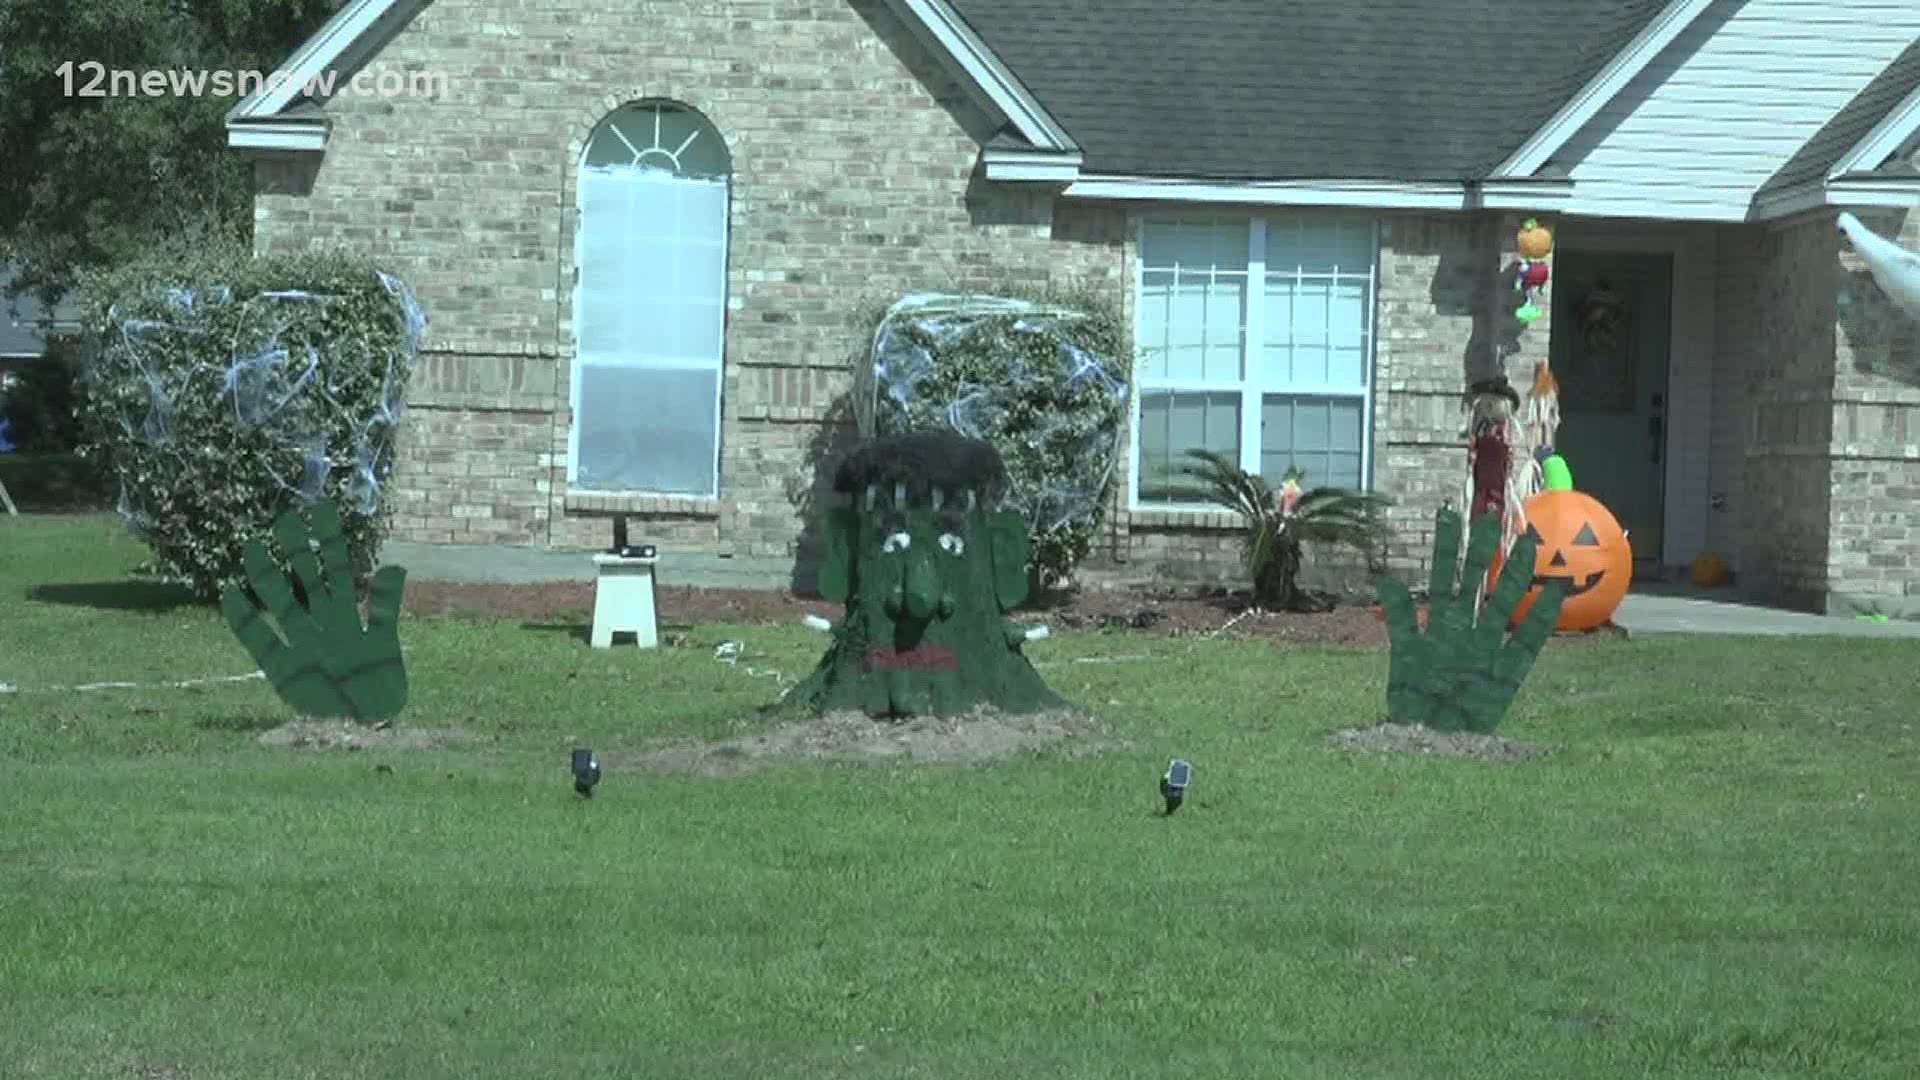 Here's a unique Halloween display in an Orange neighborhood still recovering from Hurricane Laura.